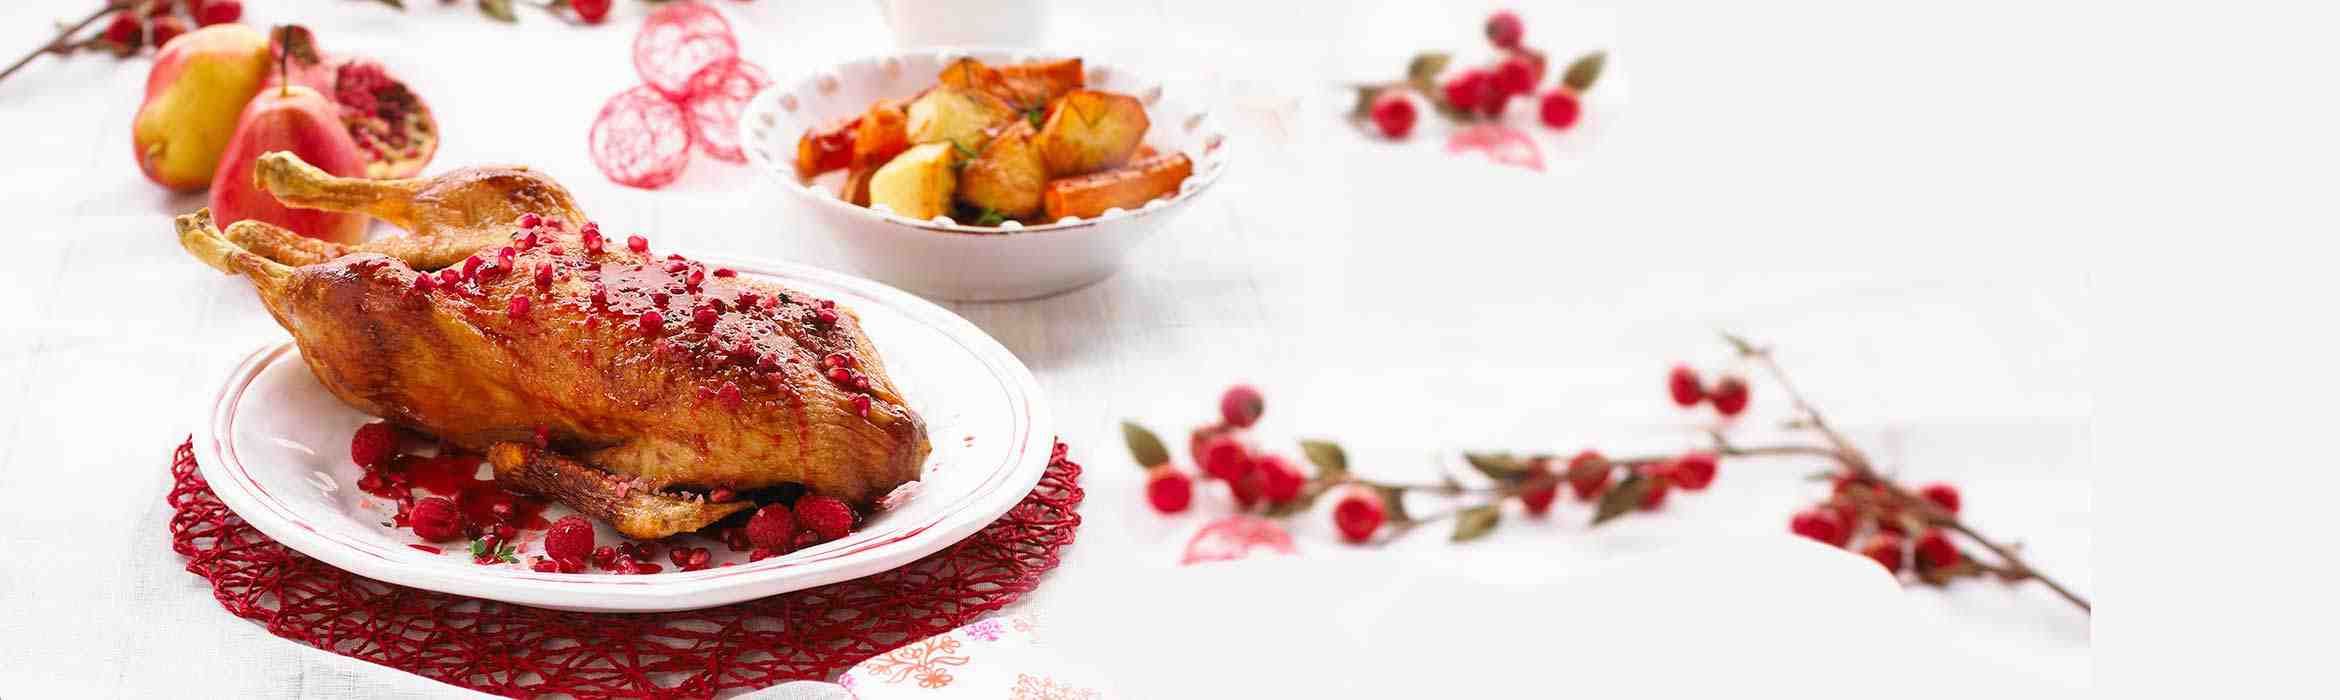 Nutrition tips and eating what you want at Christmas Recipe